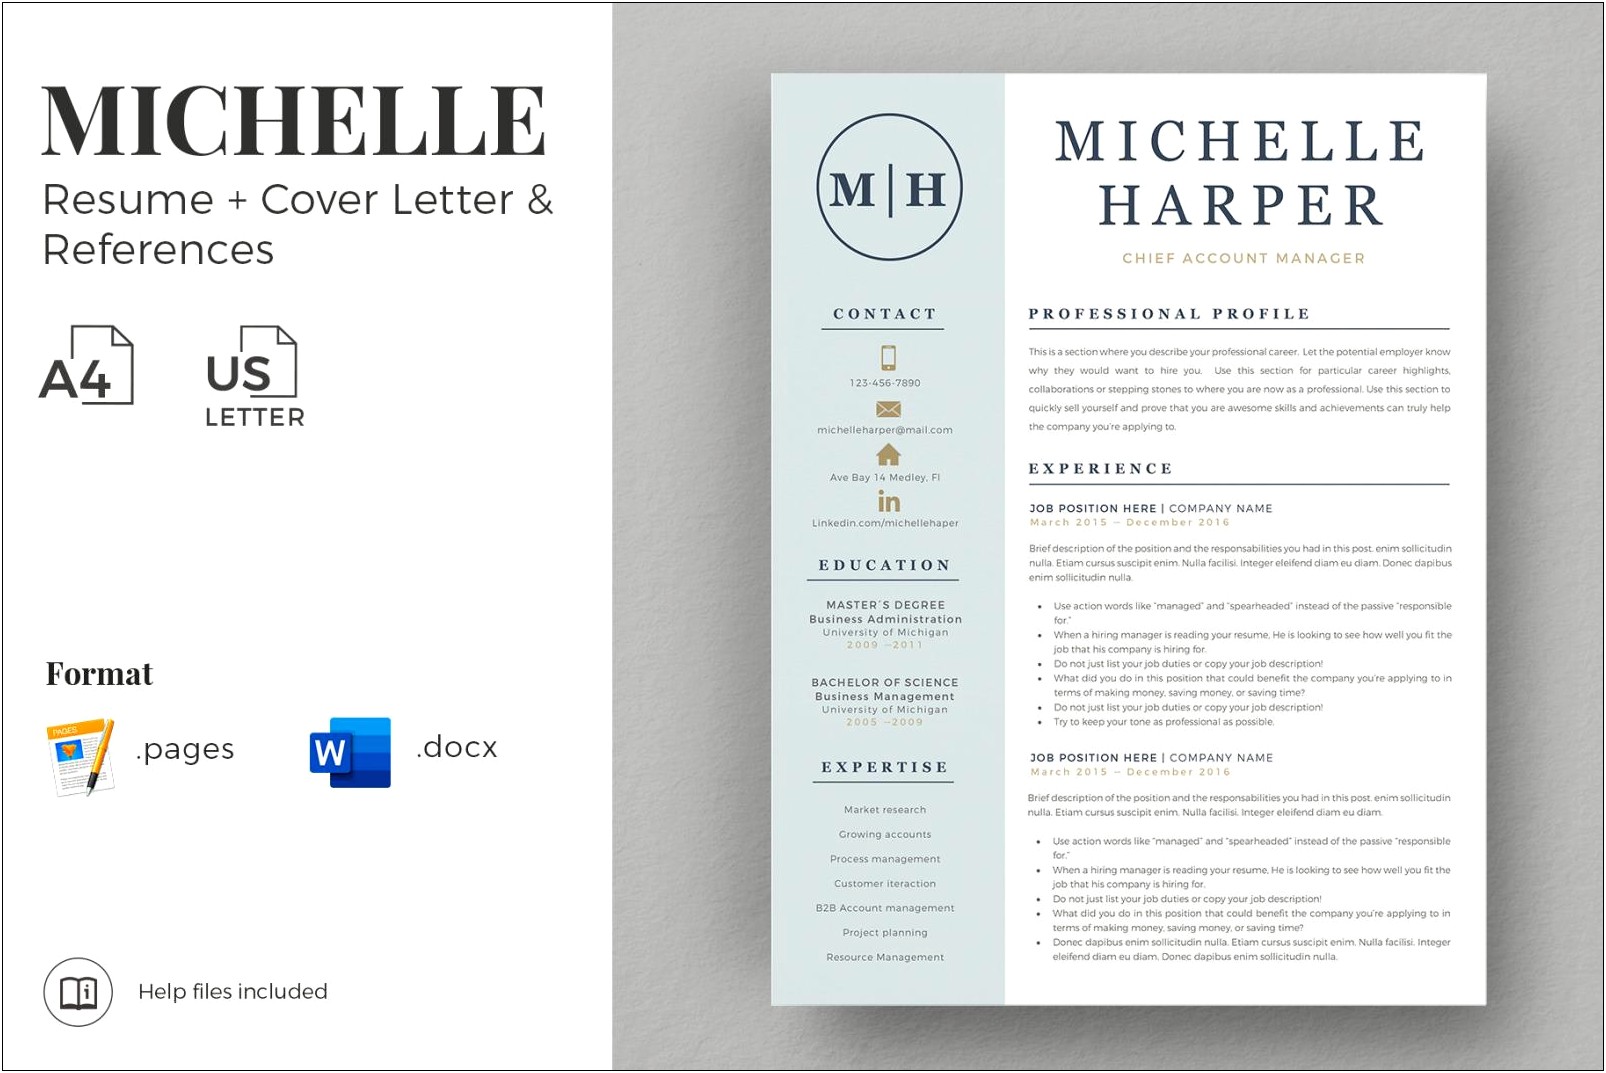 Where To Put Logos In Resume